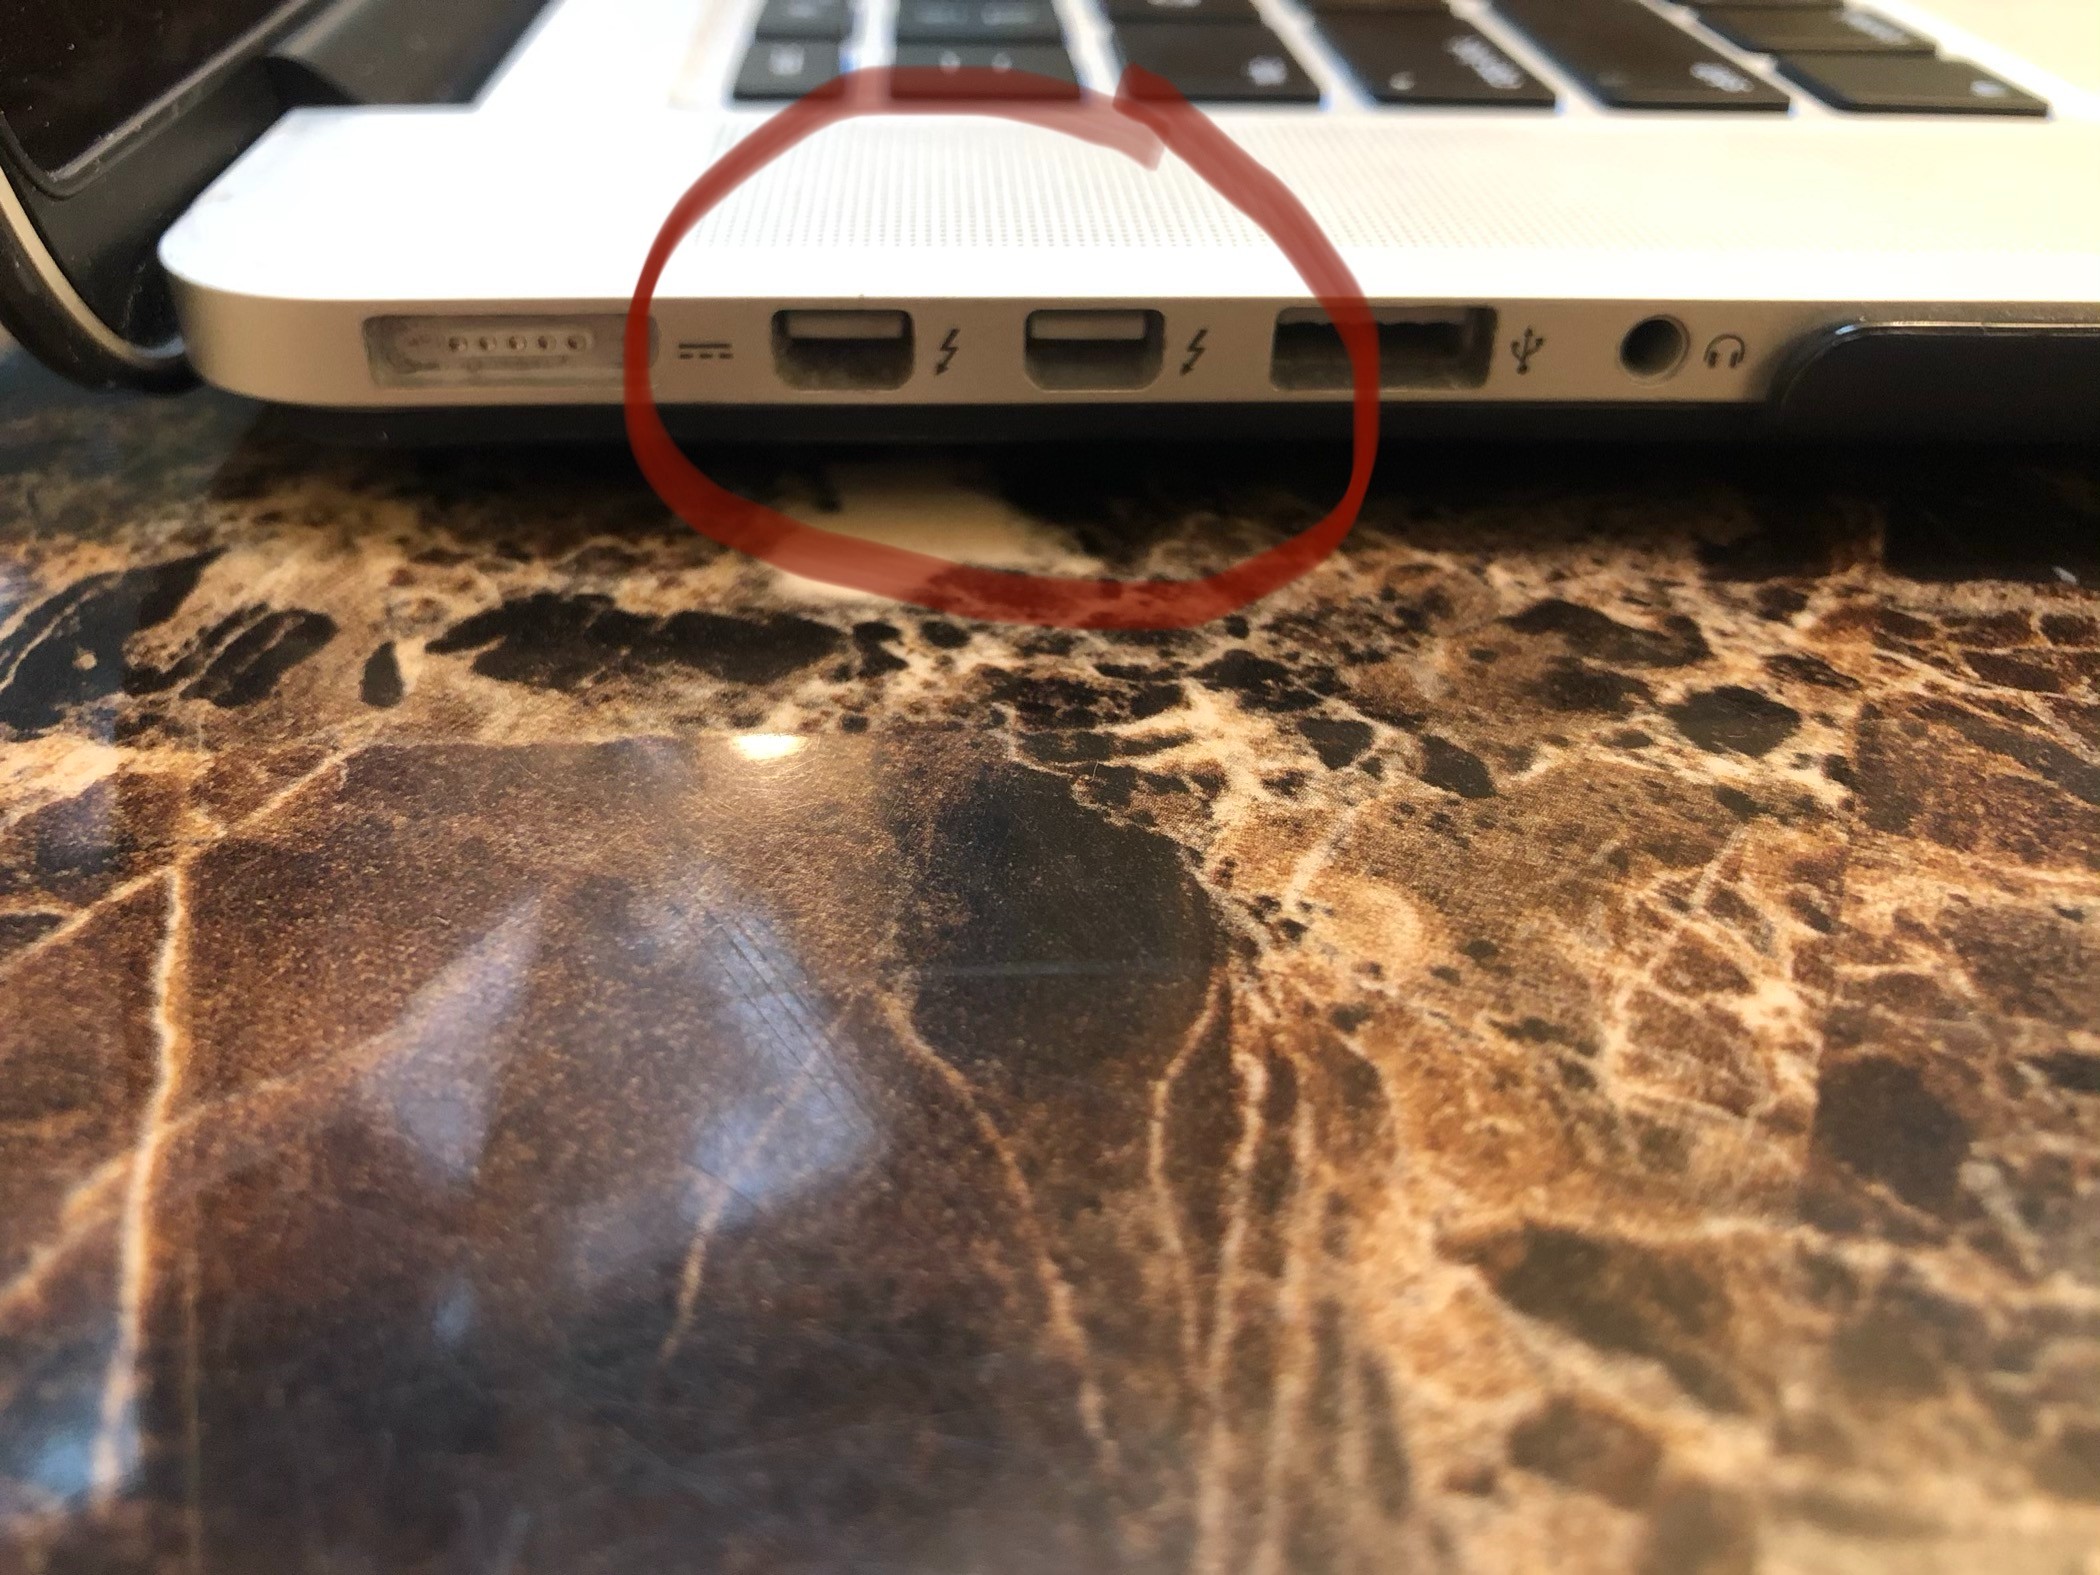 Looking For Options To Add More Usb Ports Apple Community